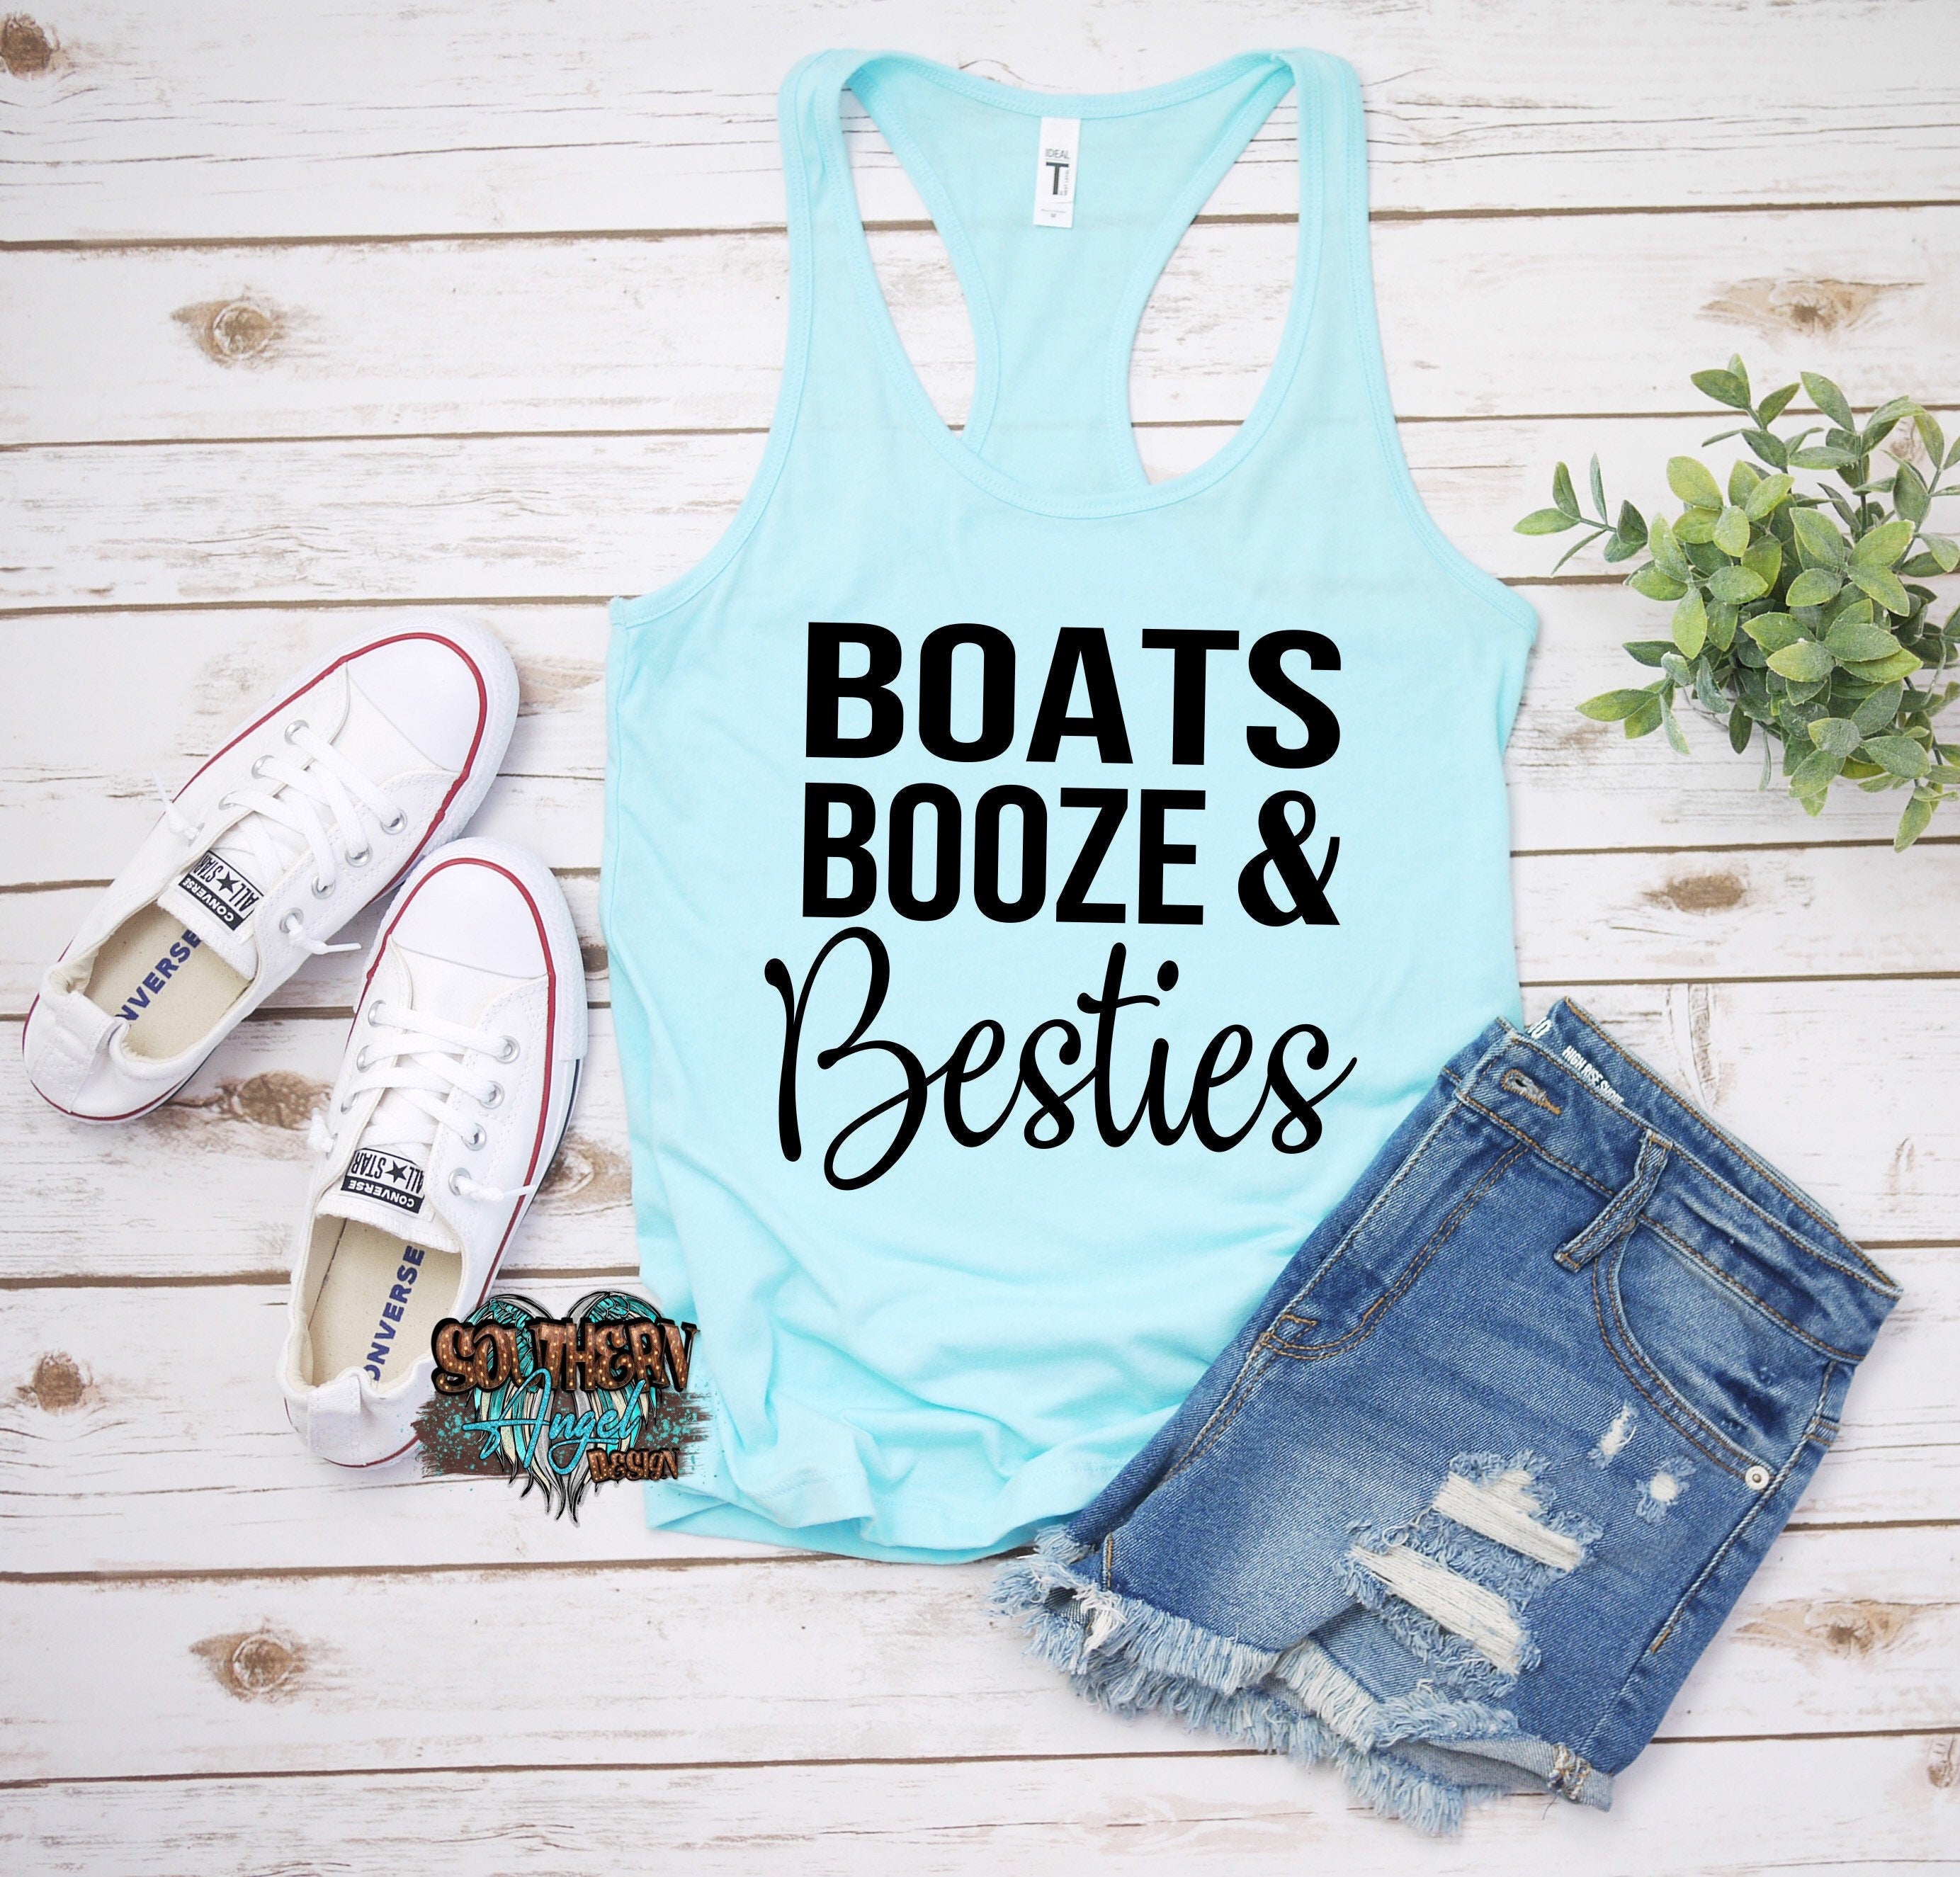 Boats Booze And Besties tank | Summer tank | Boating tank | Vacation shirt | Drinking thank | Swimsuit coverup | River tank | Party tank